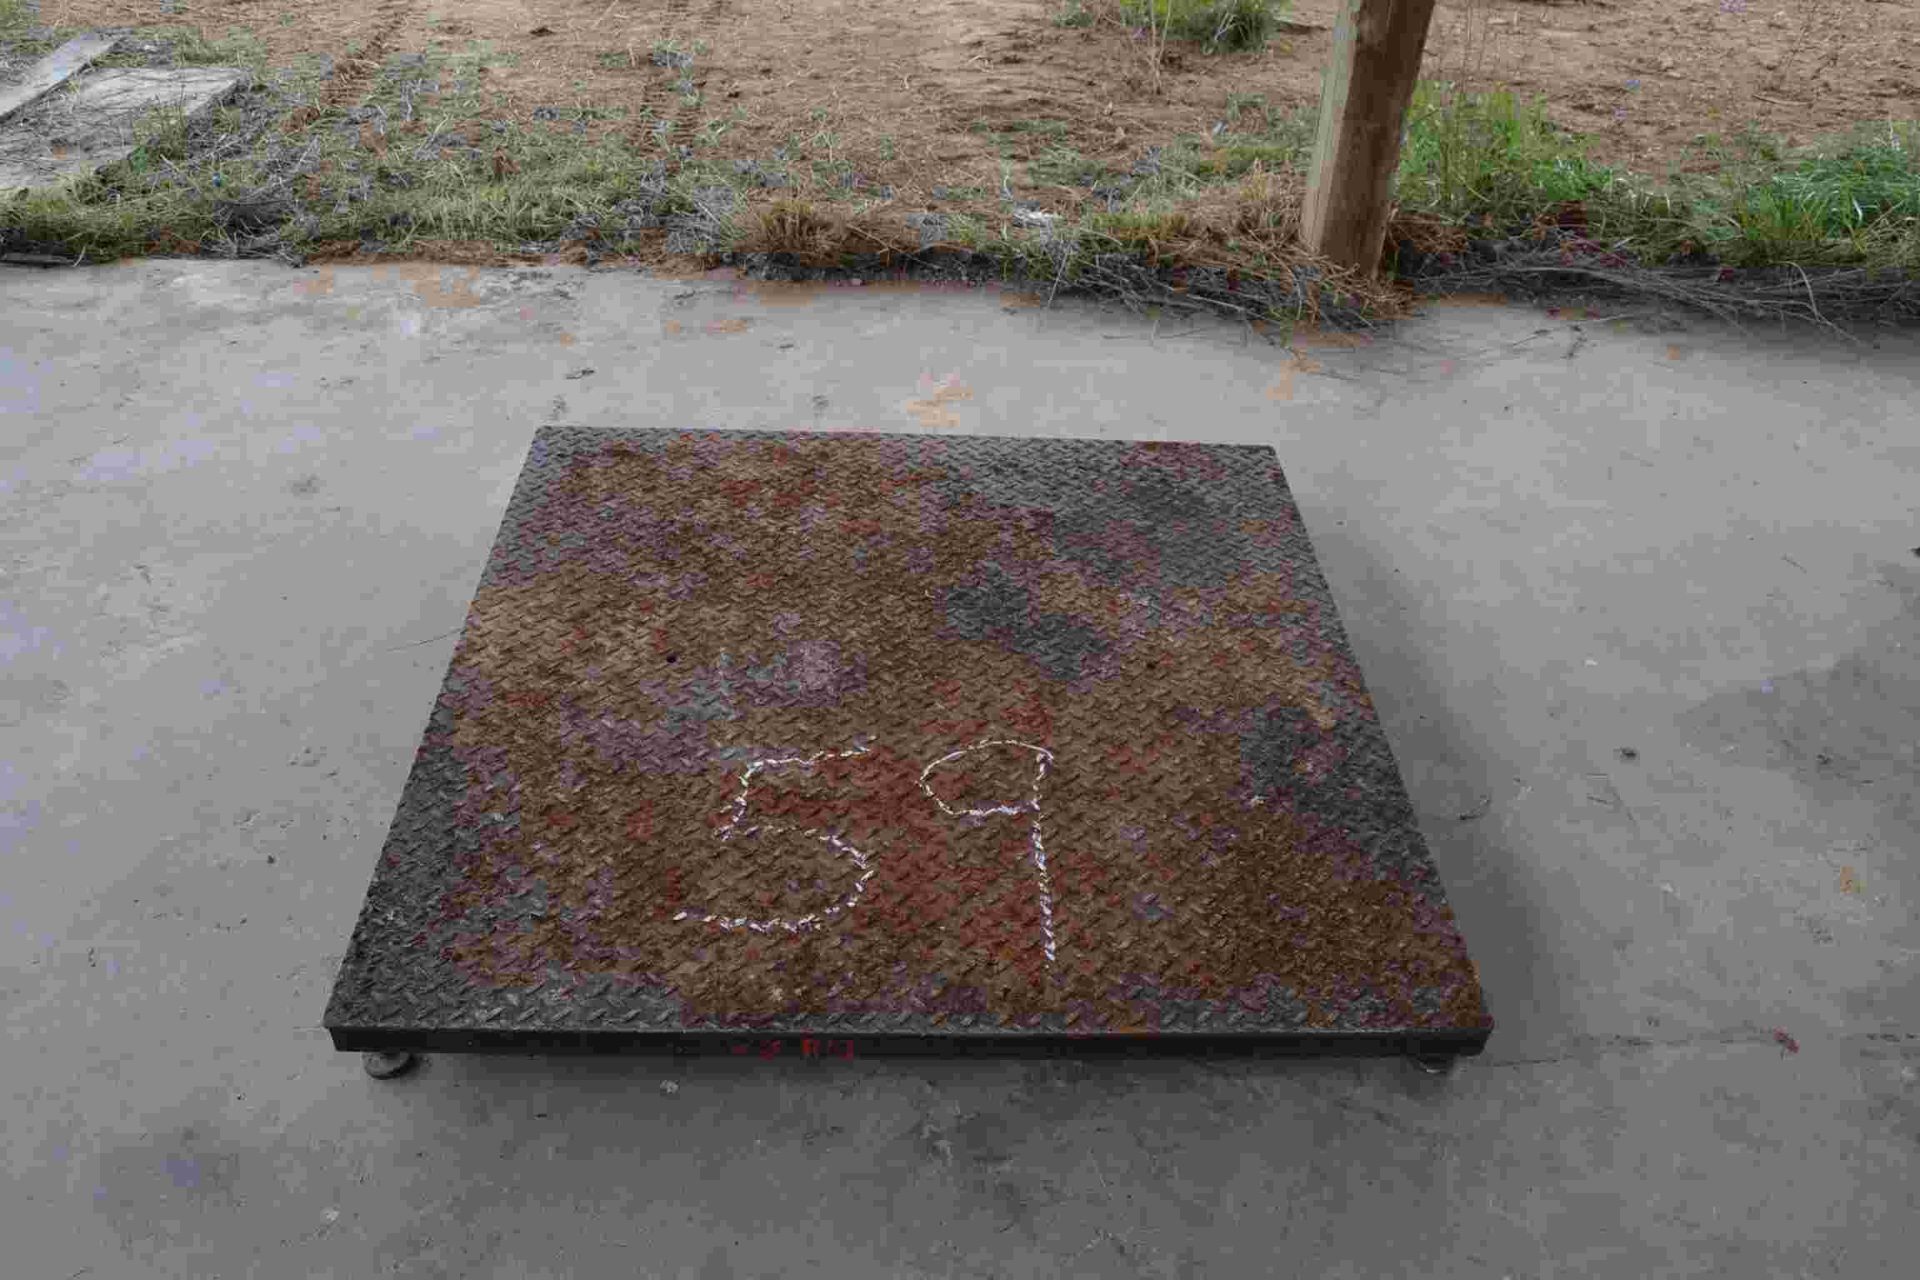 4'X4' PALLET SCALES NO CONTROLS OR READ OUT LOCATED SITE 1 - Image 2 of 2